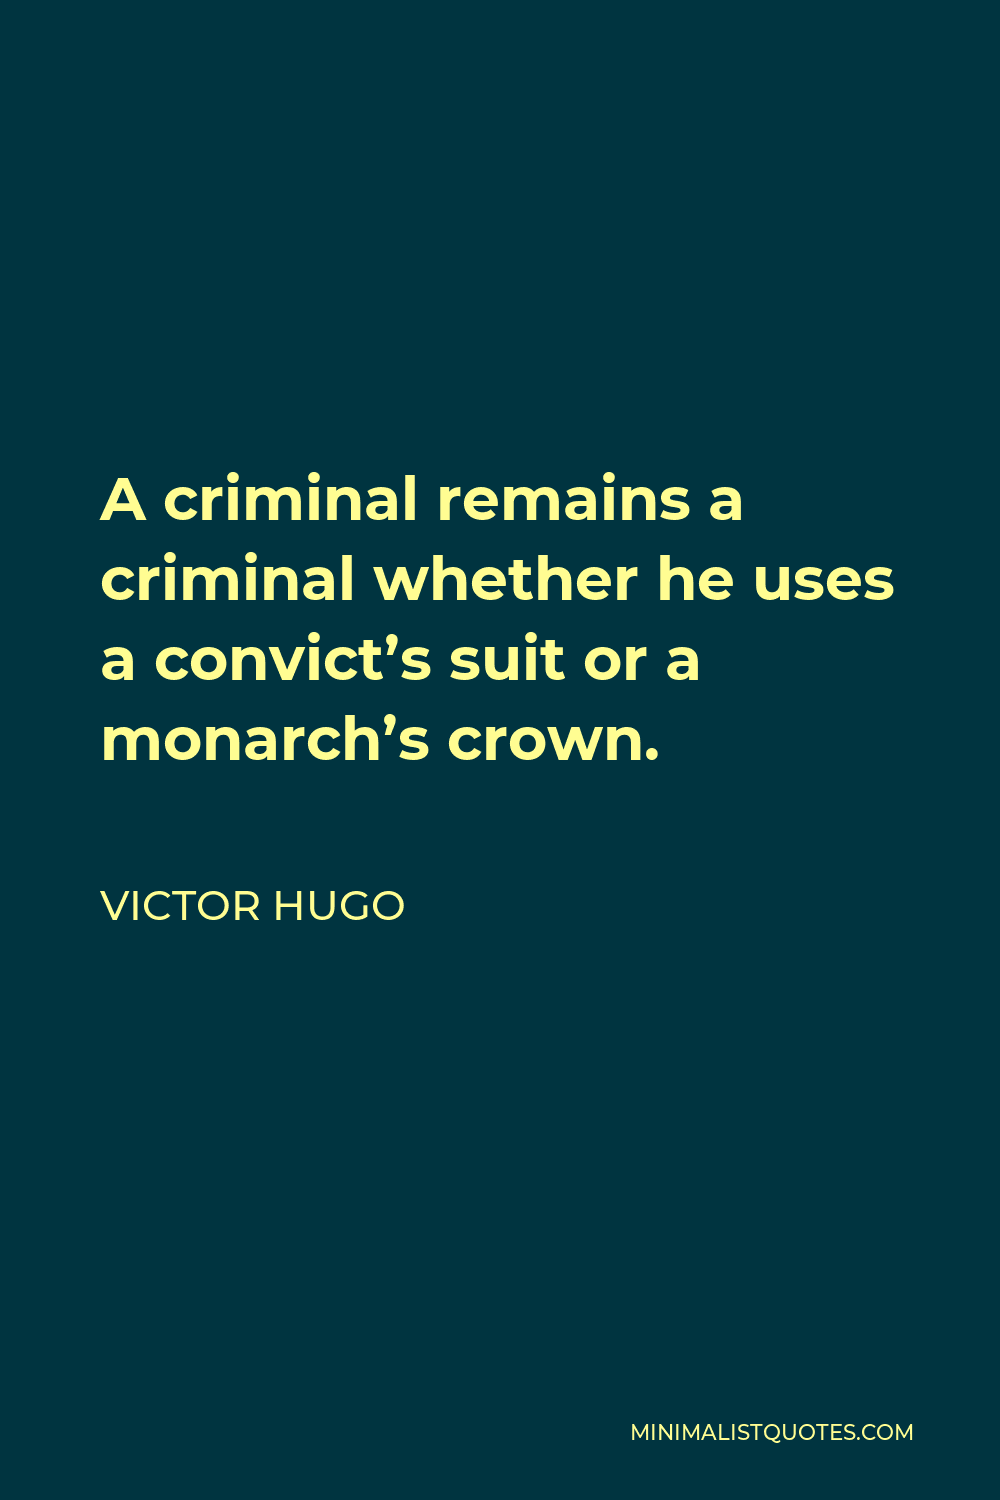 Victor Hugo Quote - A criminal remains a criminal whether he uses a convict’s suit or a monarch’s crown.